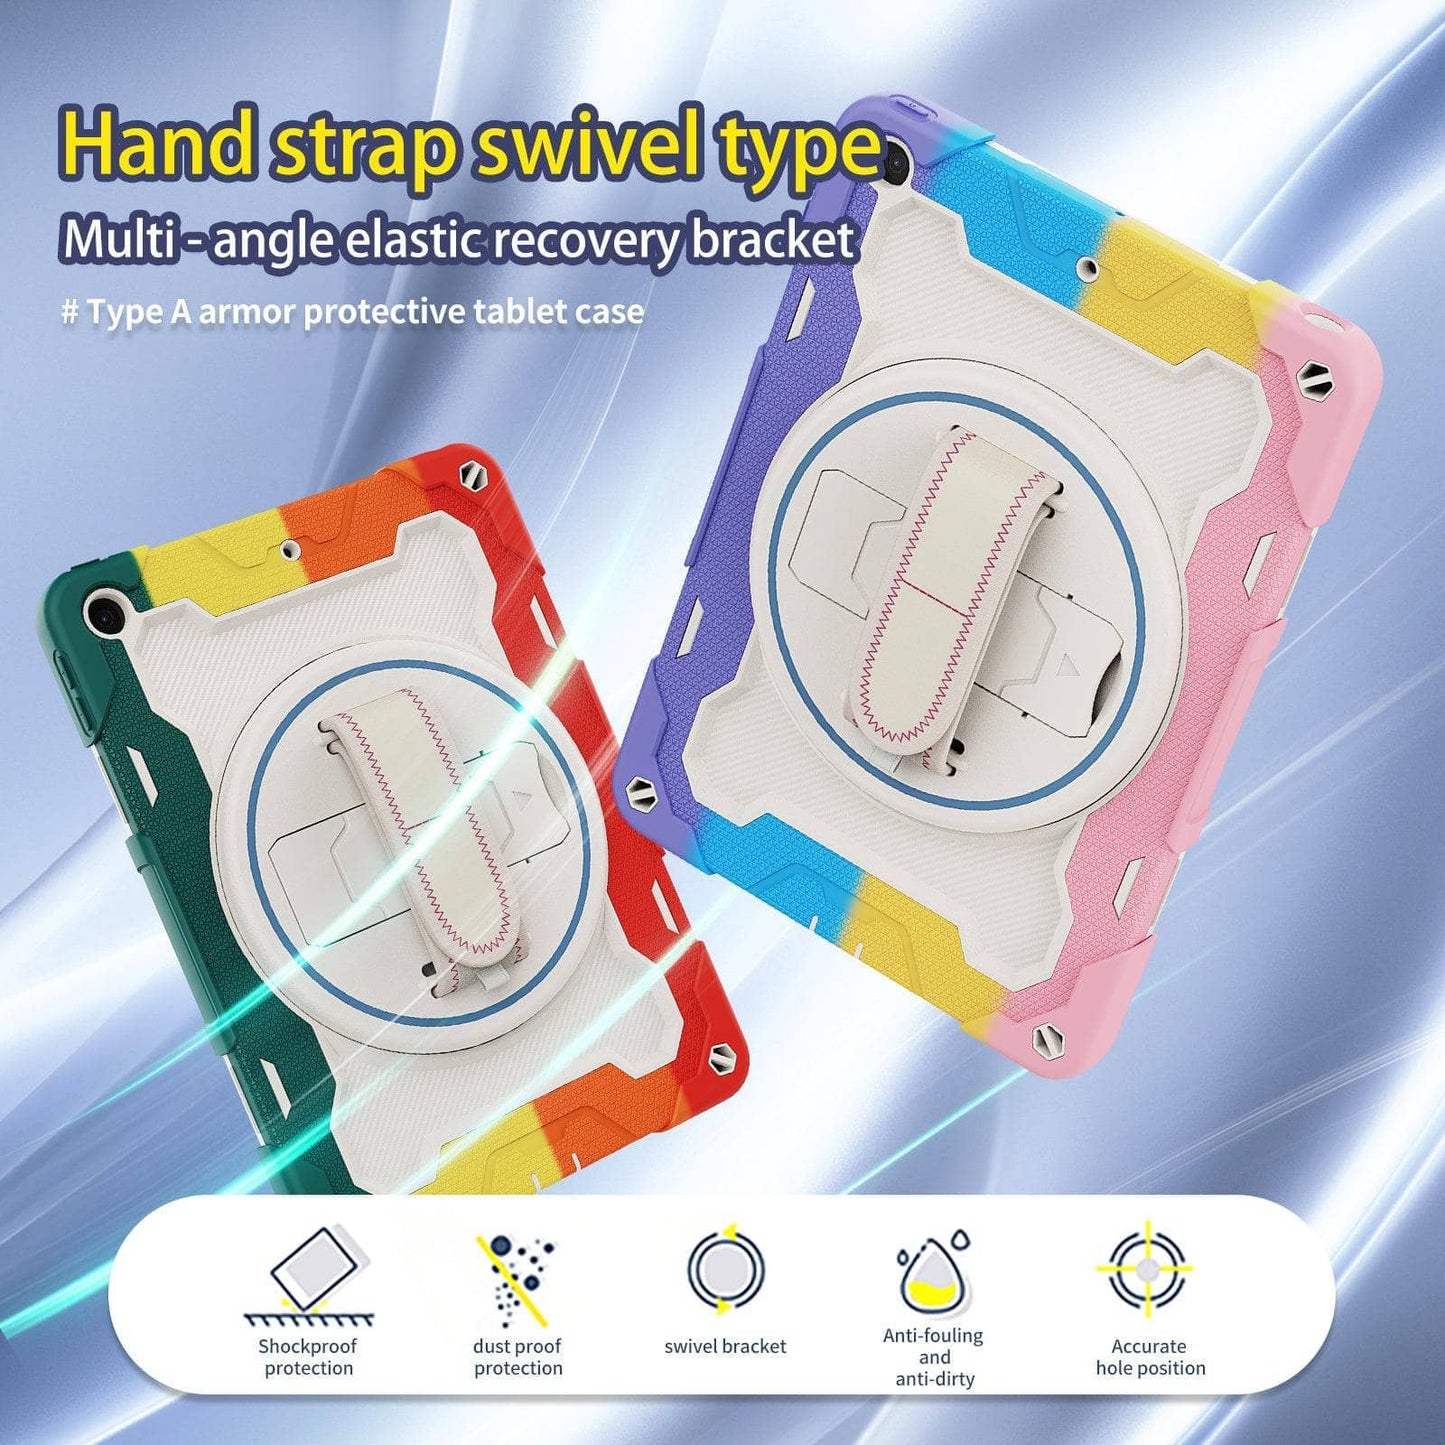 Heavy Duty Case For iPad 10.2 7th 8th 9th 2019 2020 2021 10.2 inch Cover Hand-held Shock Proof Cover Full Body Handle Kids Case-iPad Case-MASCOTS-www.PhoneGuy.com.au